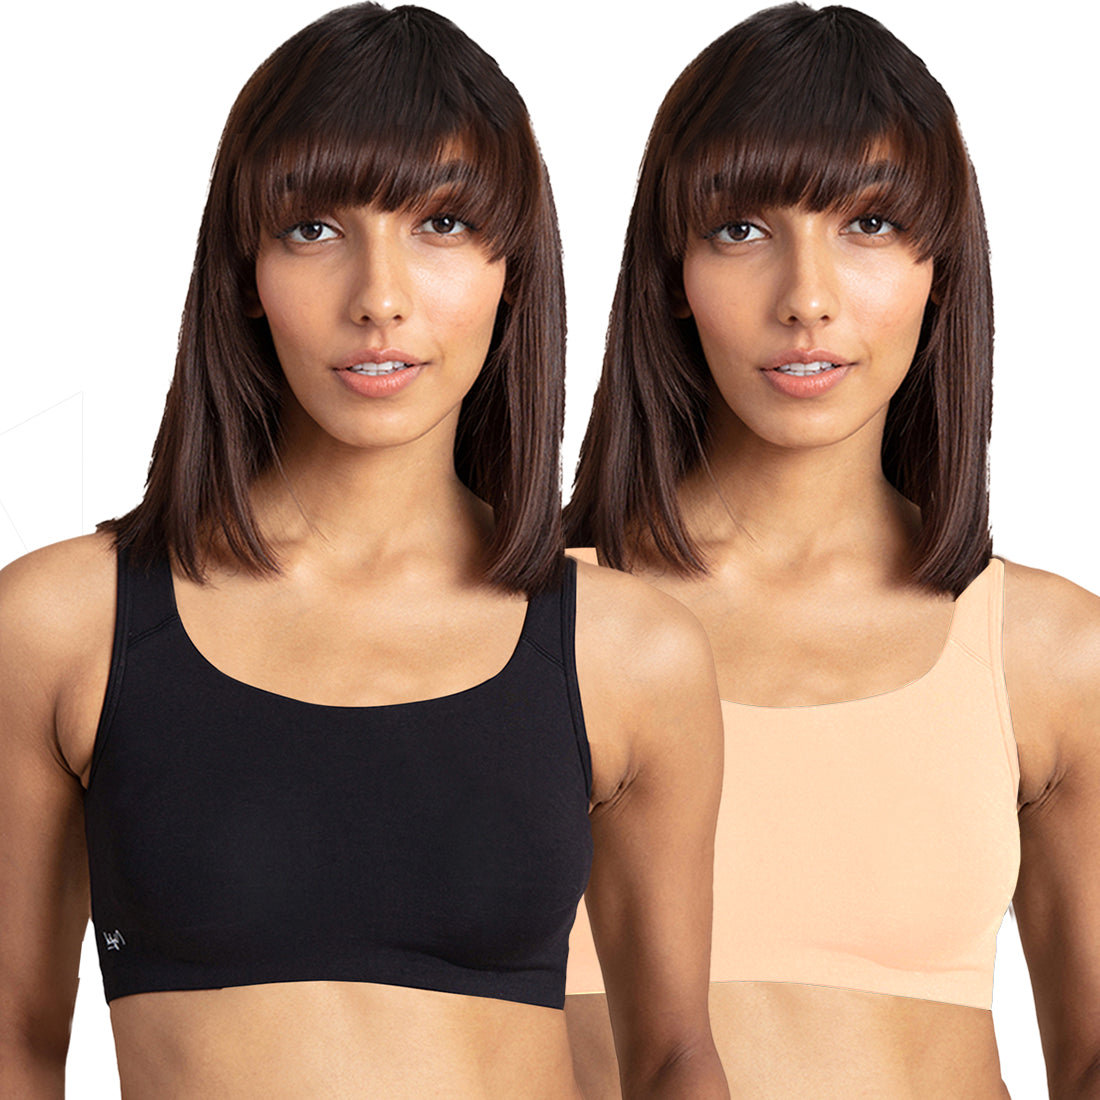 Pack of 2 Soft cup easy-peasy slip-on bra with Full coverage - NYB113 Black & Skin